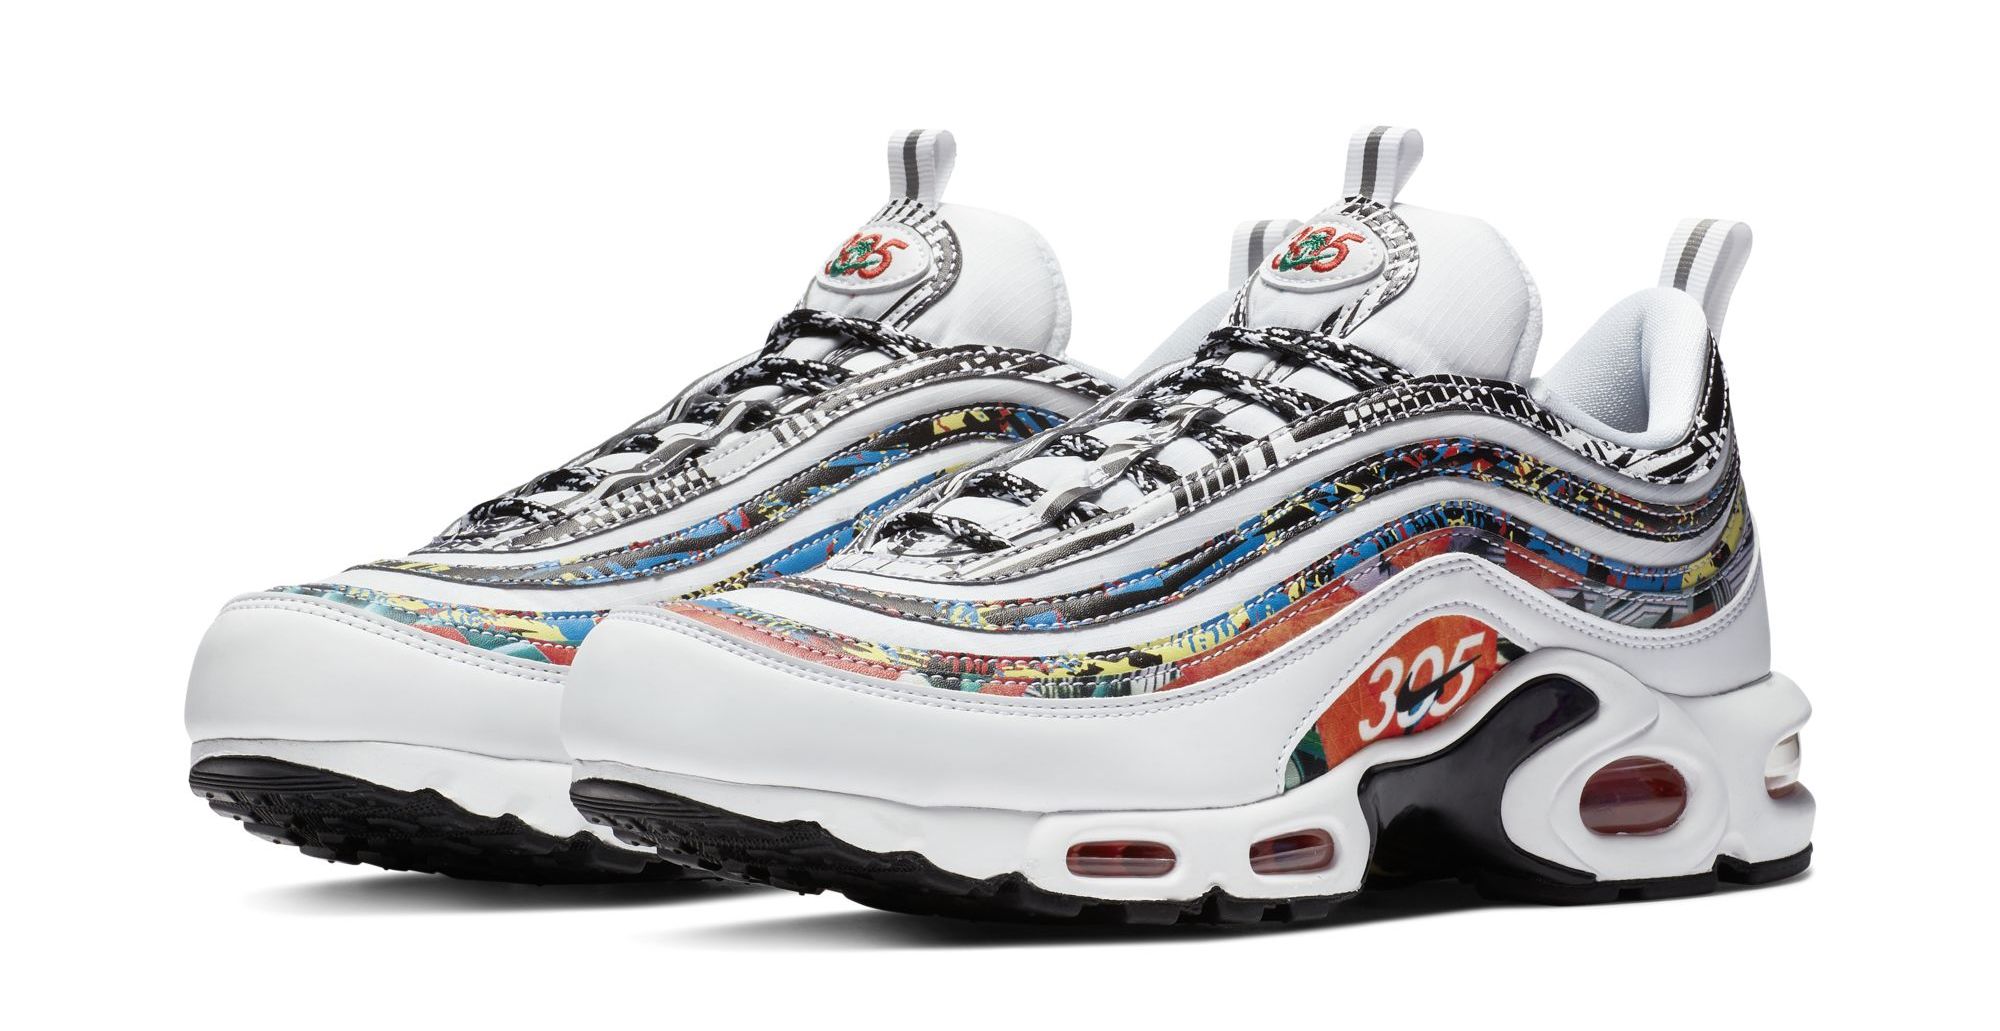 Archeologie biografie Kast Nike Air Max Plus 97 'Miami' Release Date | Sole Collector